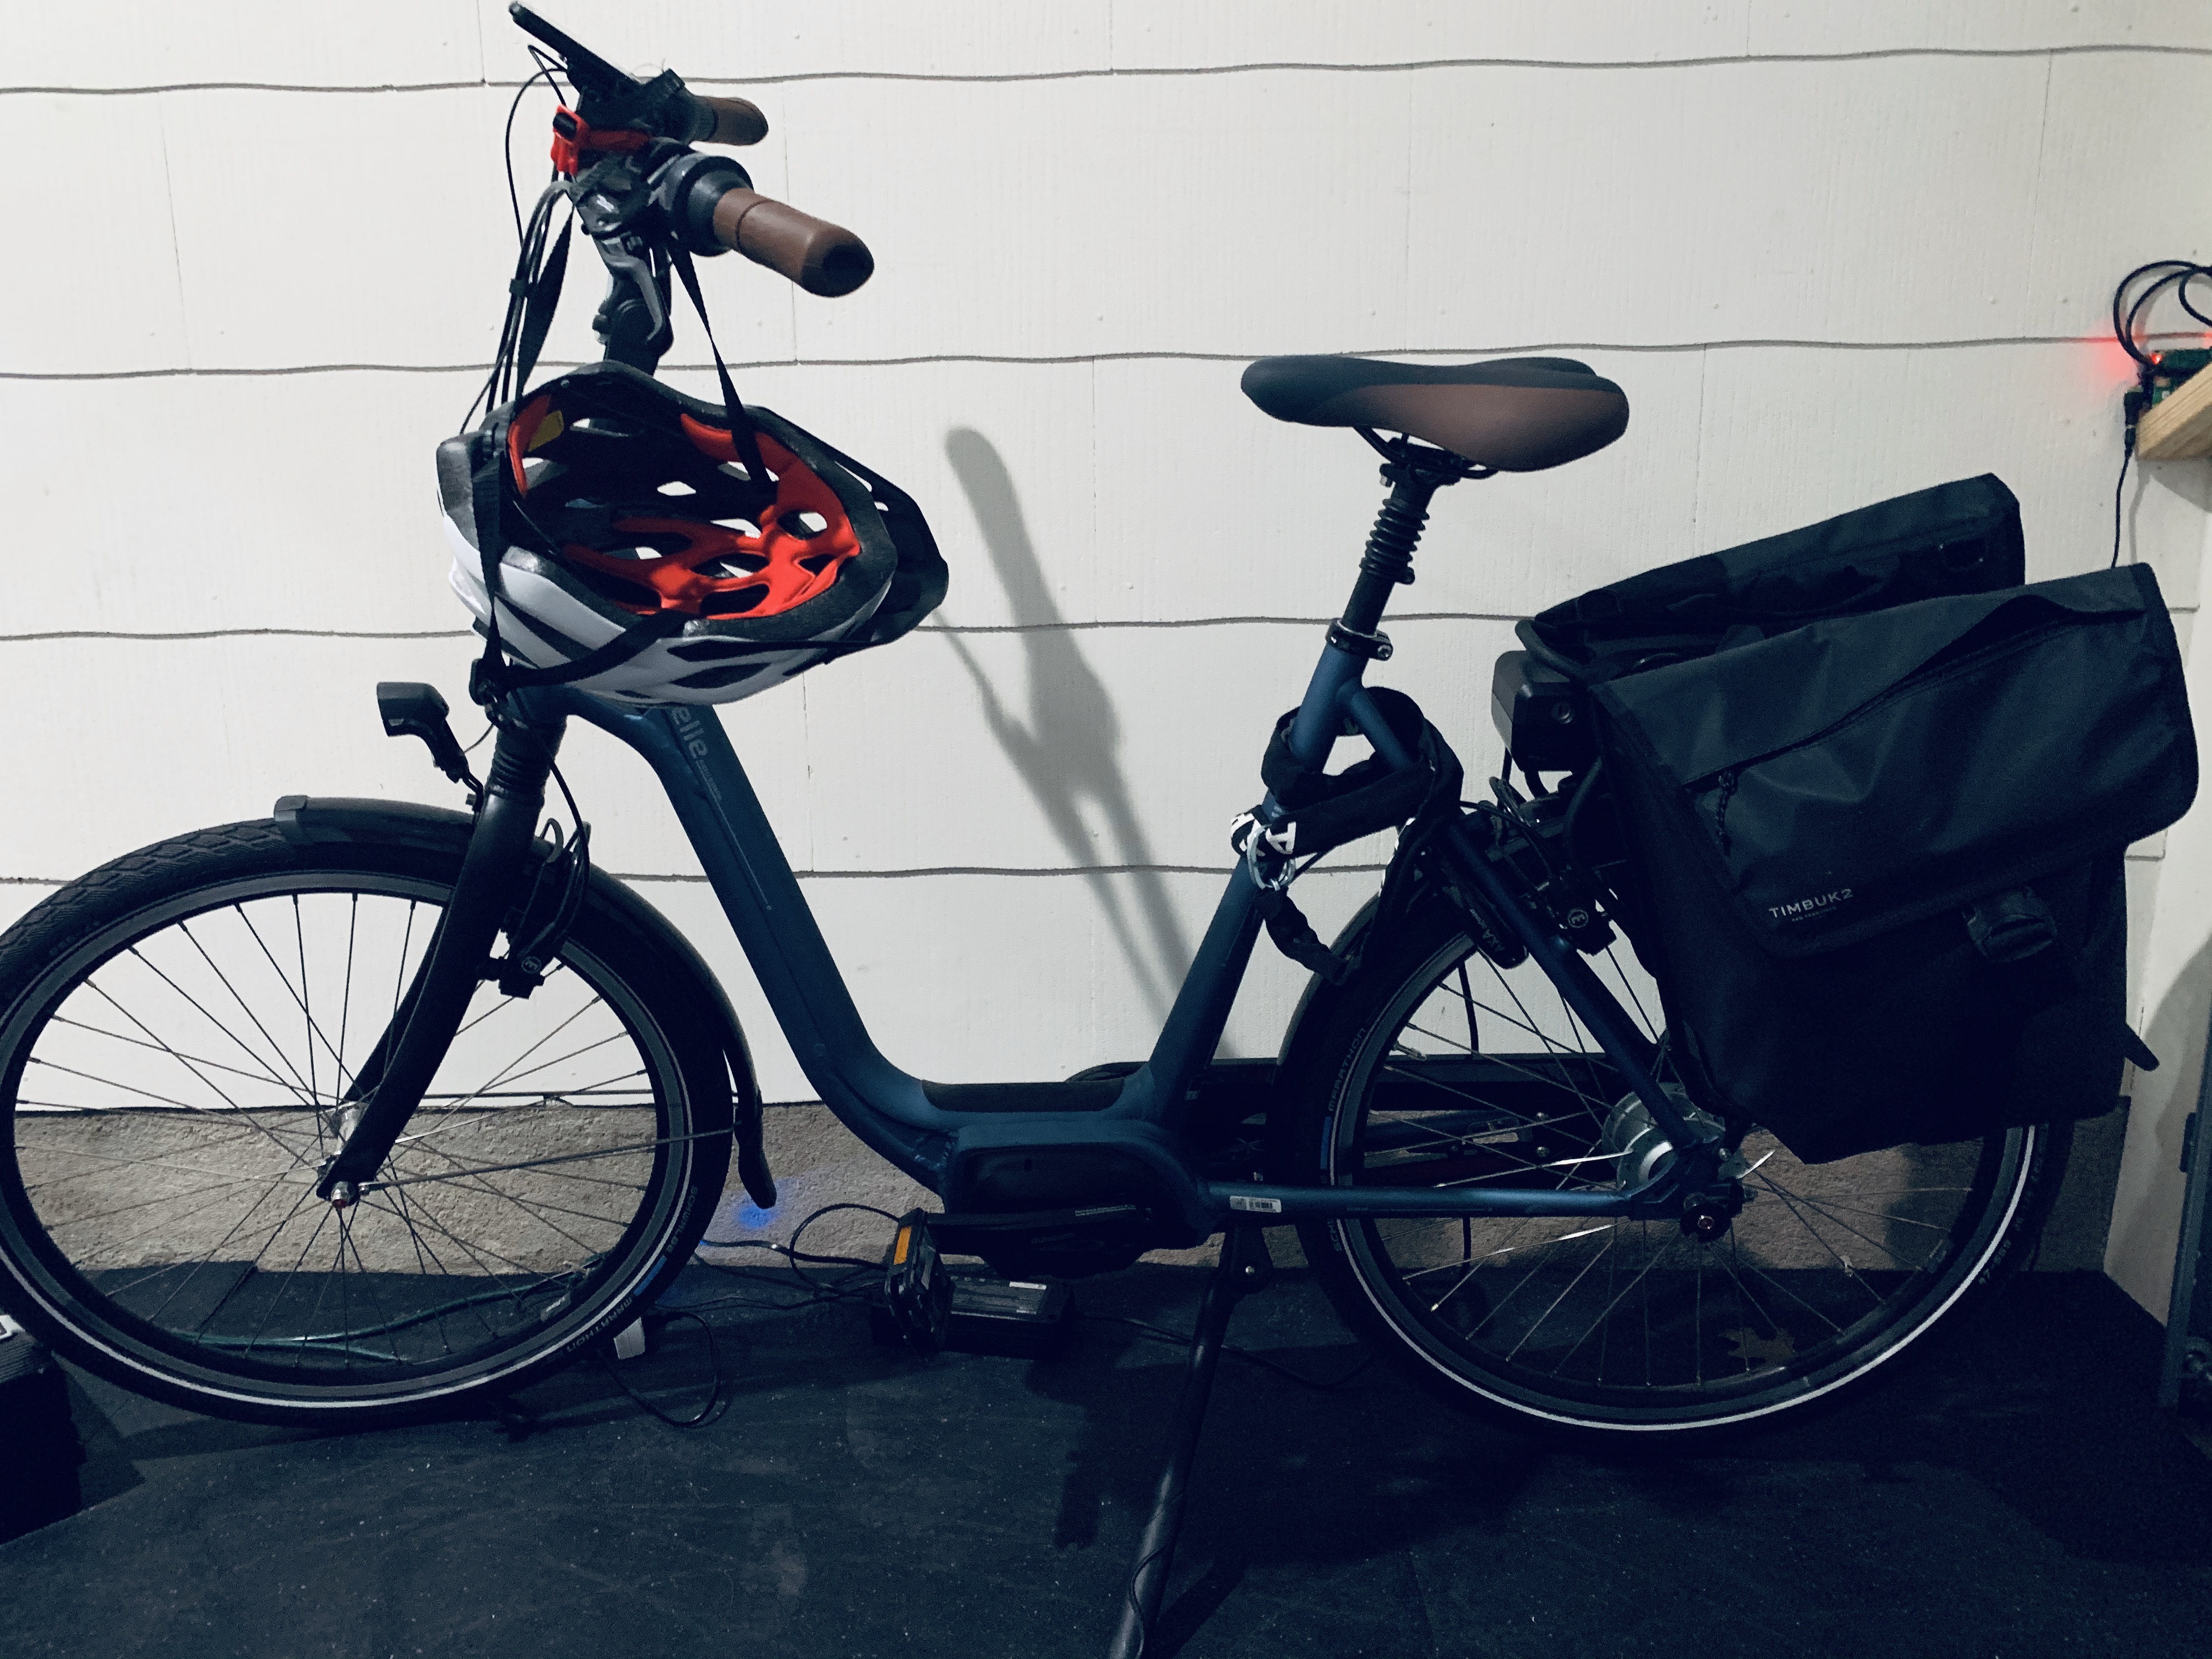 Gazelle electric bicycle parked in garage with helmet hanging from handlebars